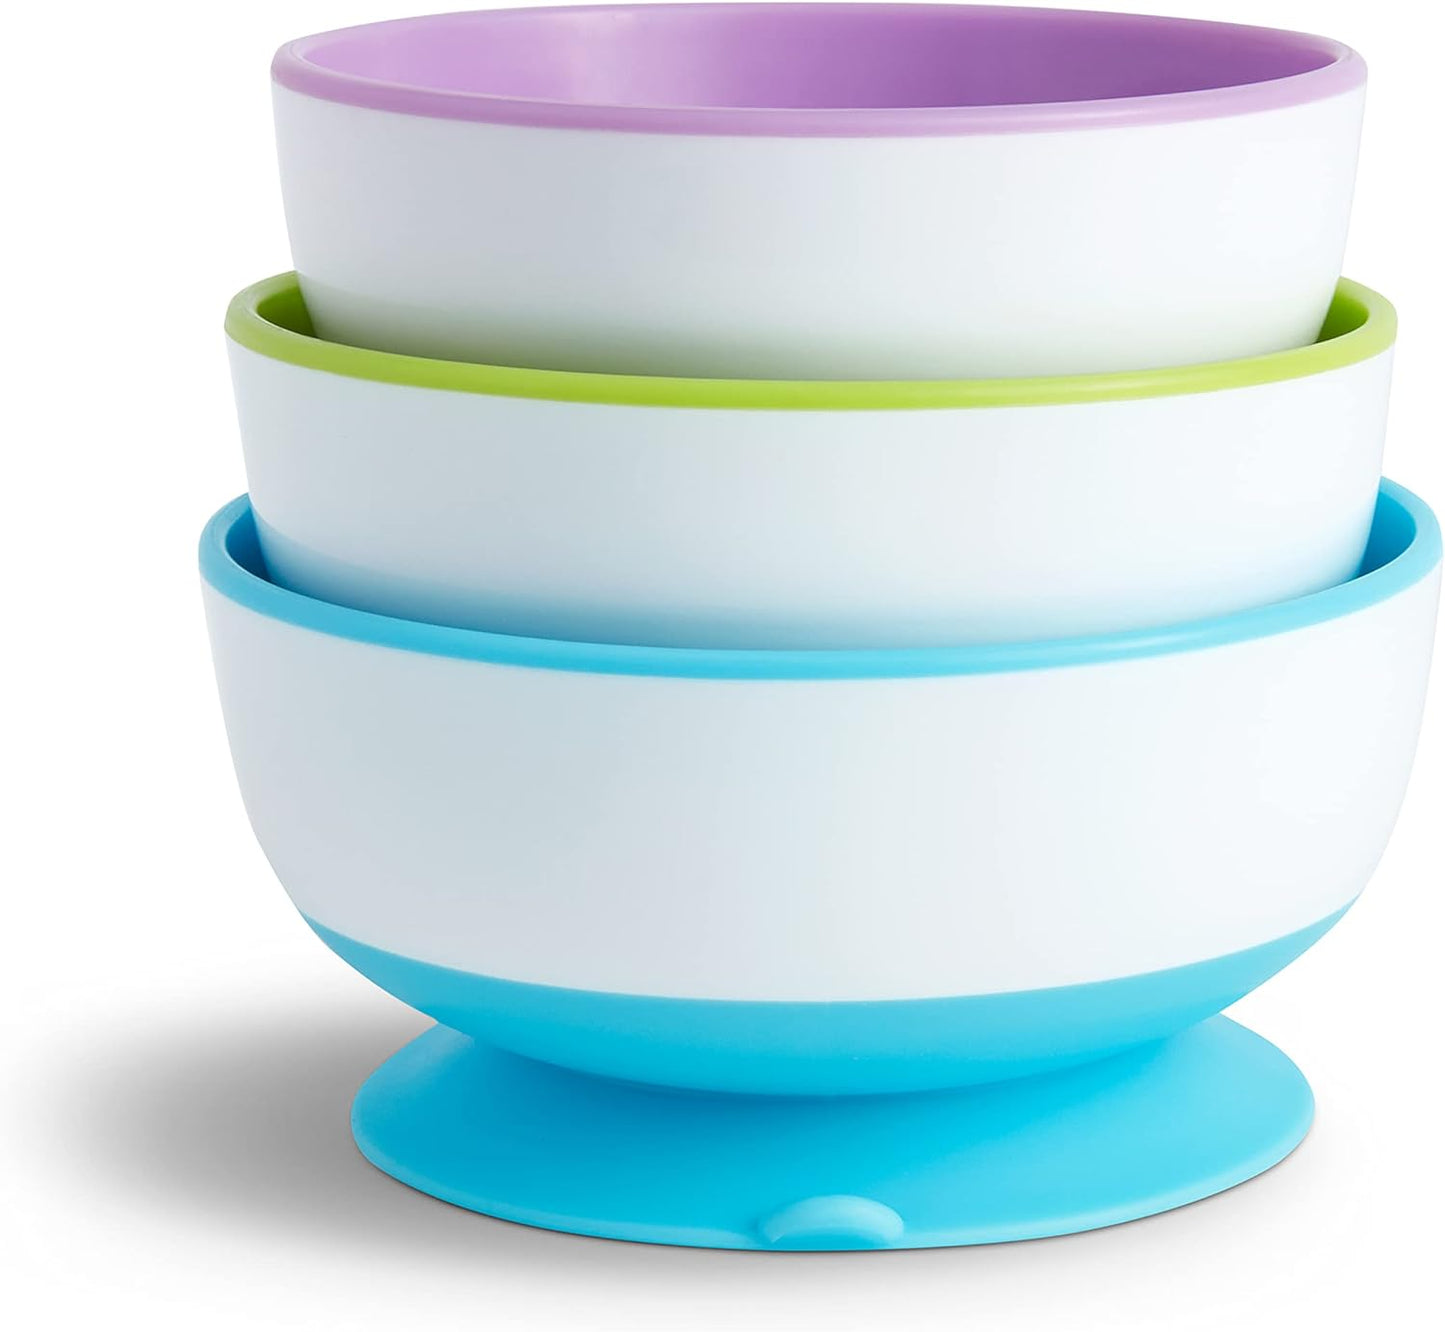 Munchkin® Snack Catcher® Toddler Snack Cups, 4 Pack, Blue/Green/Pink/Purple